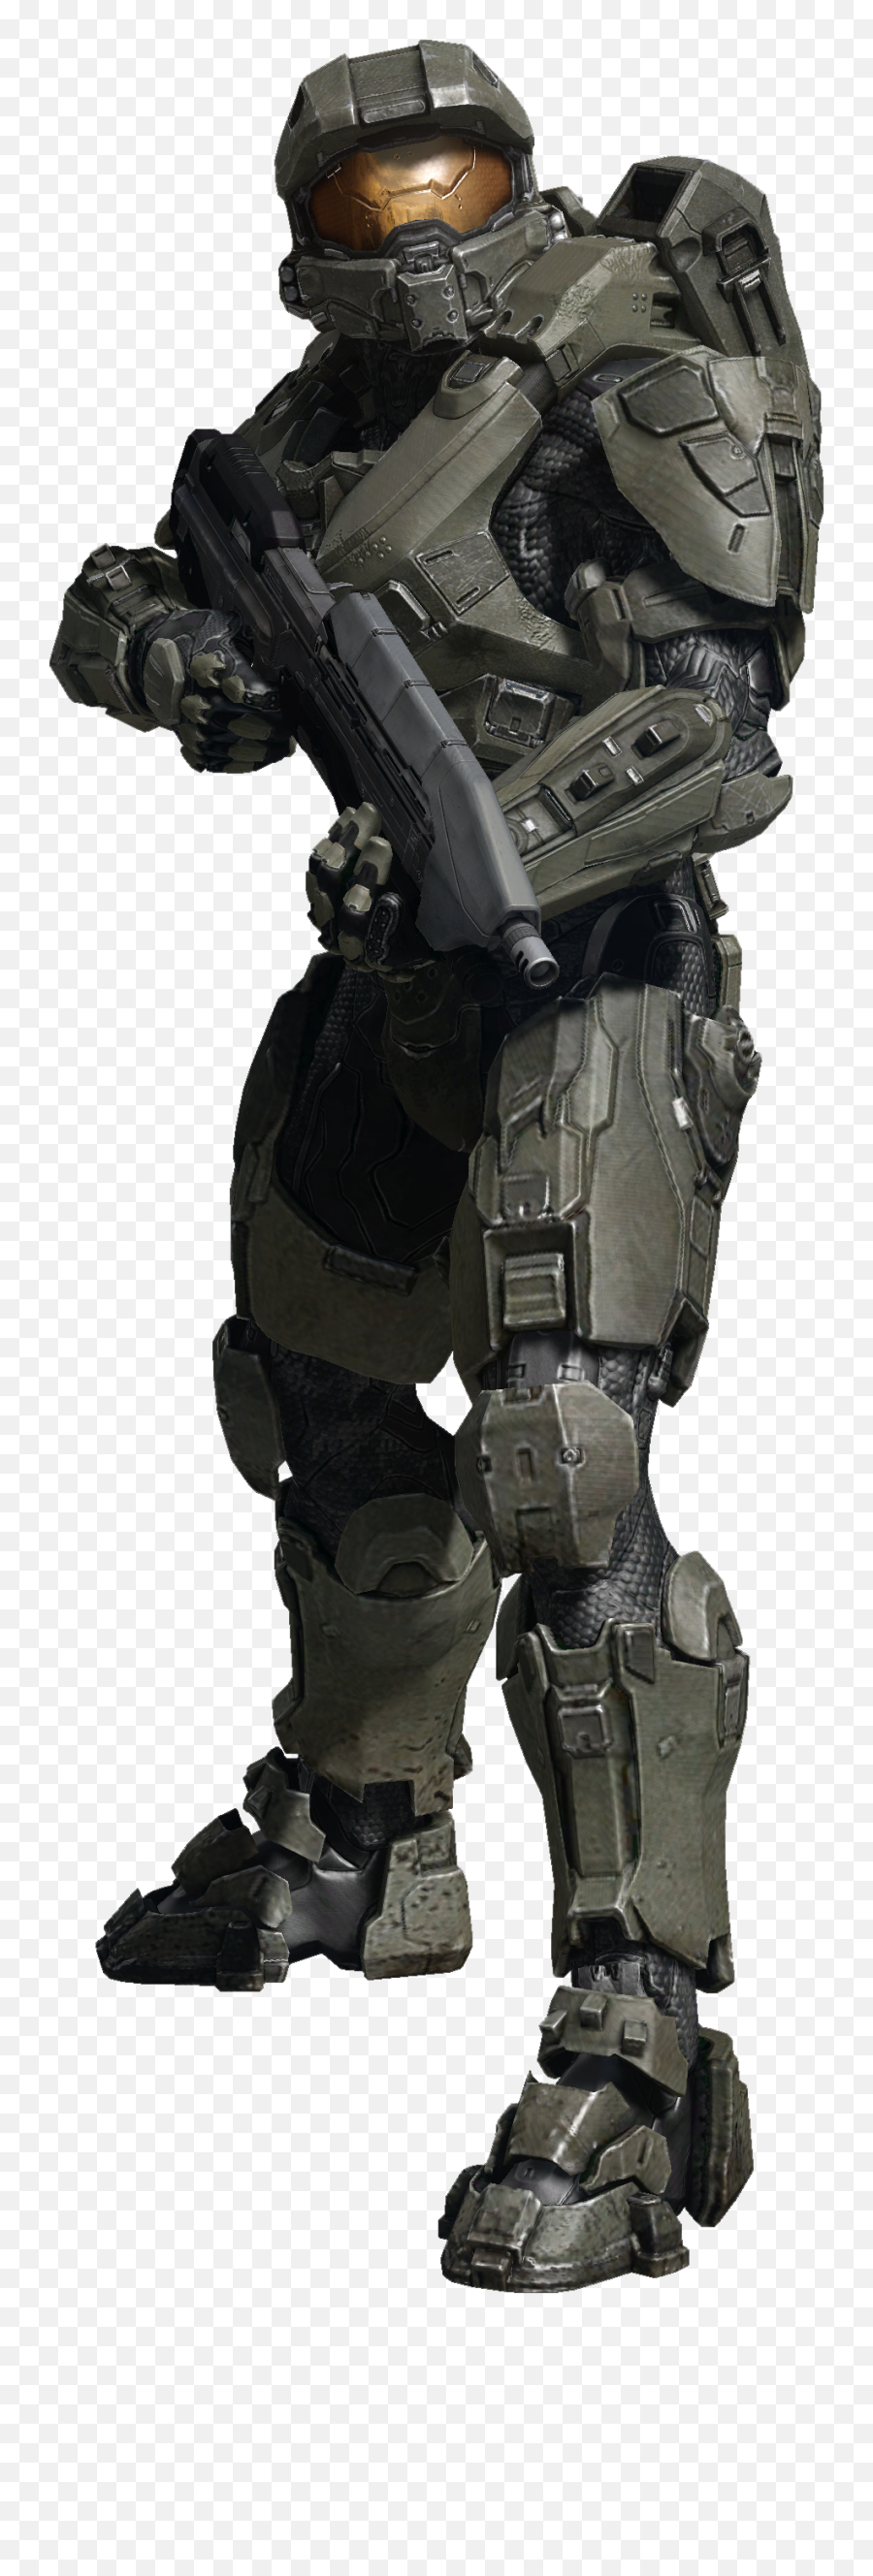 Master Chief Png Transparent Image Mart - Halo 4 Master Chief Png,Halo Transparent Background